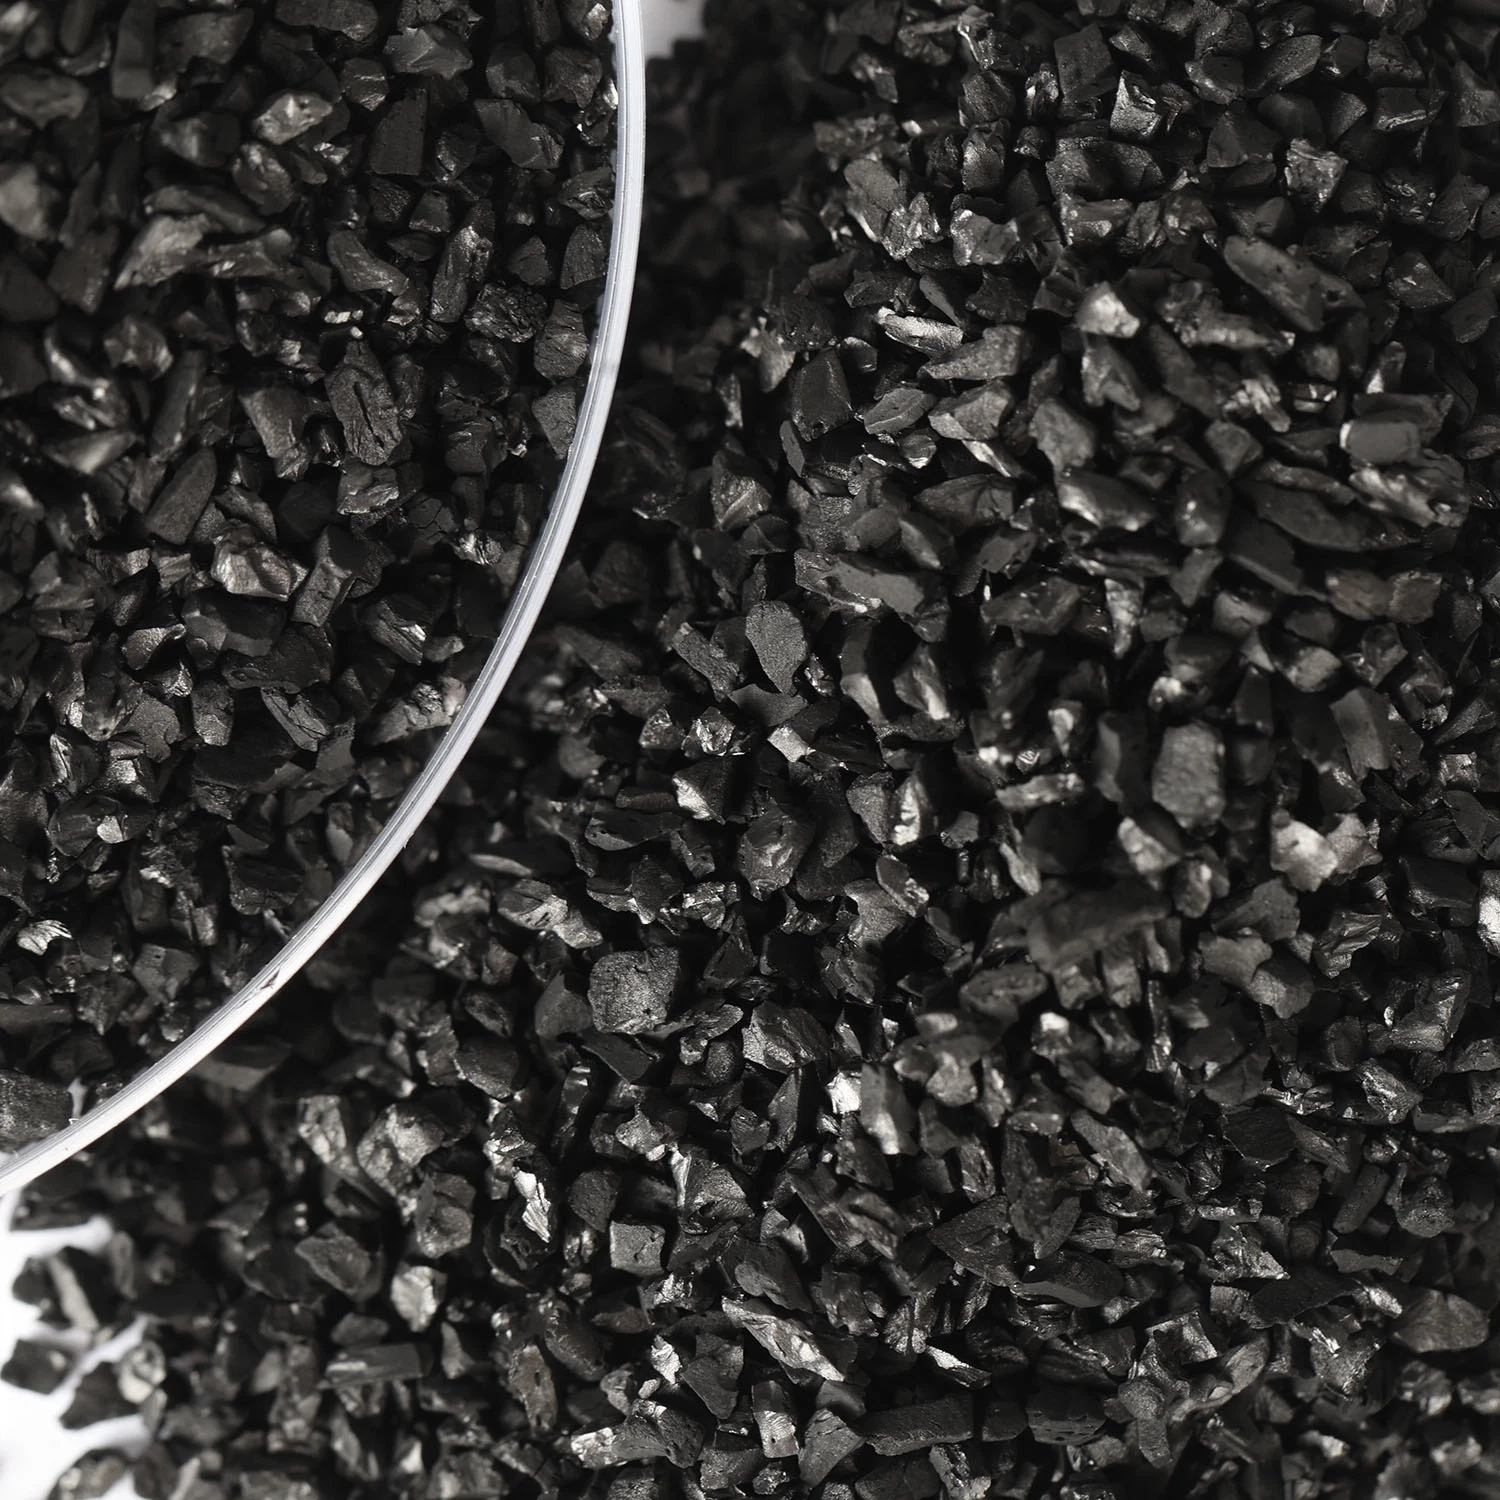 1000 Mg Per G Iodine Adsorption Value Black Coal Granular Activated Carbon Applied in The Field of Industrial Sewage Treatment